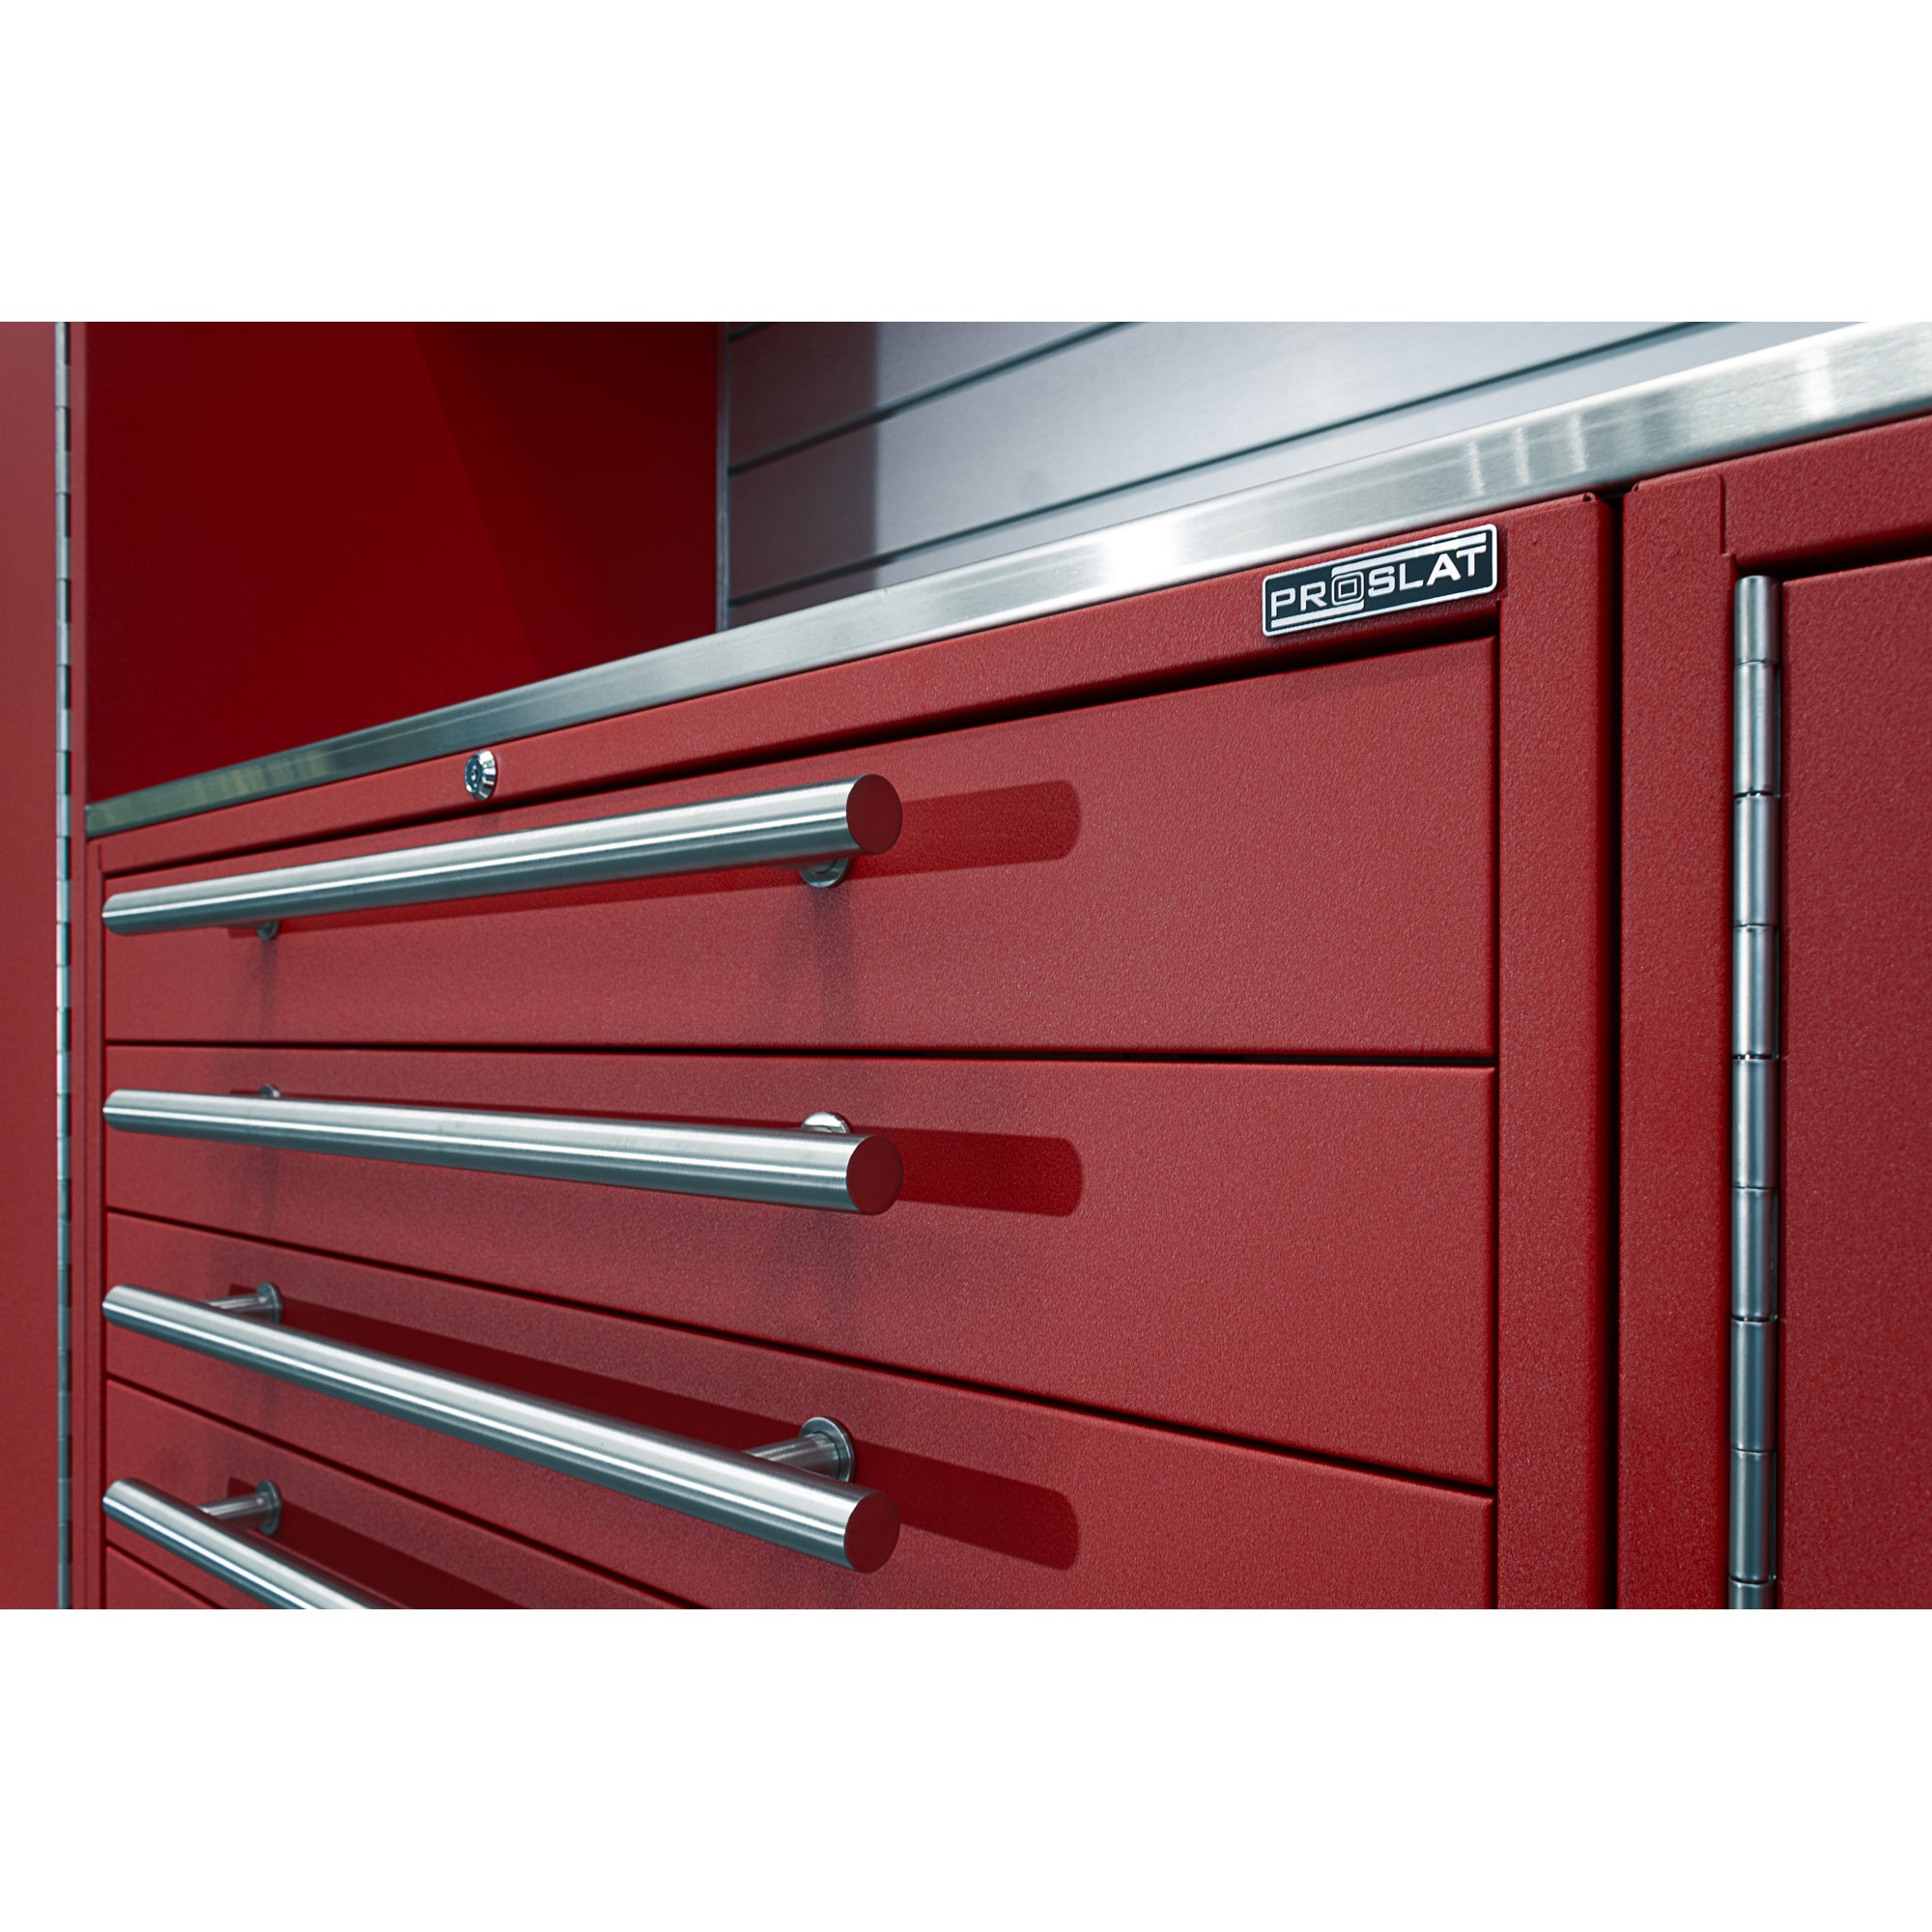 LUX Cabinets – 13 ft set – TOOL – Overheads